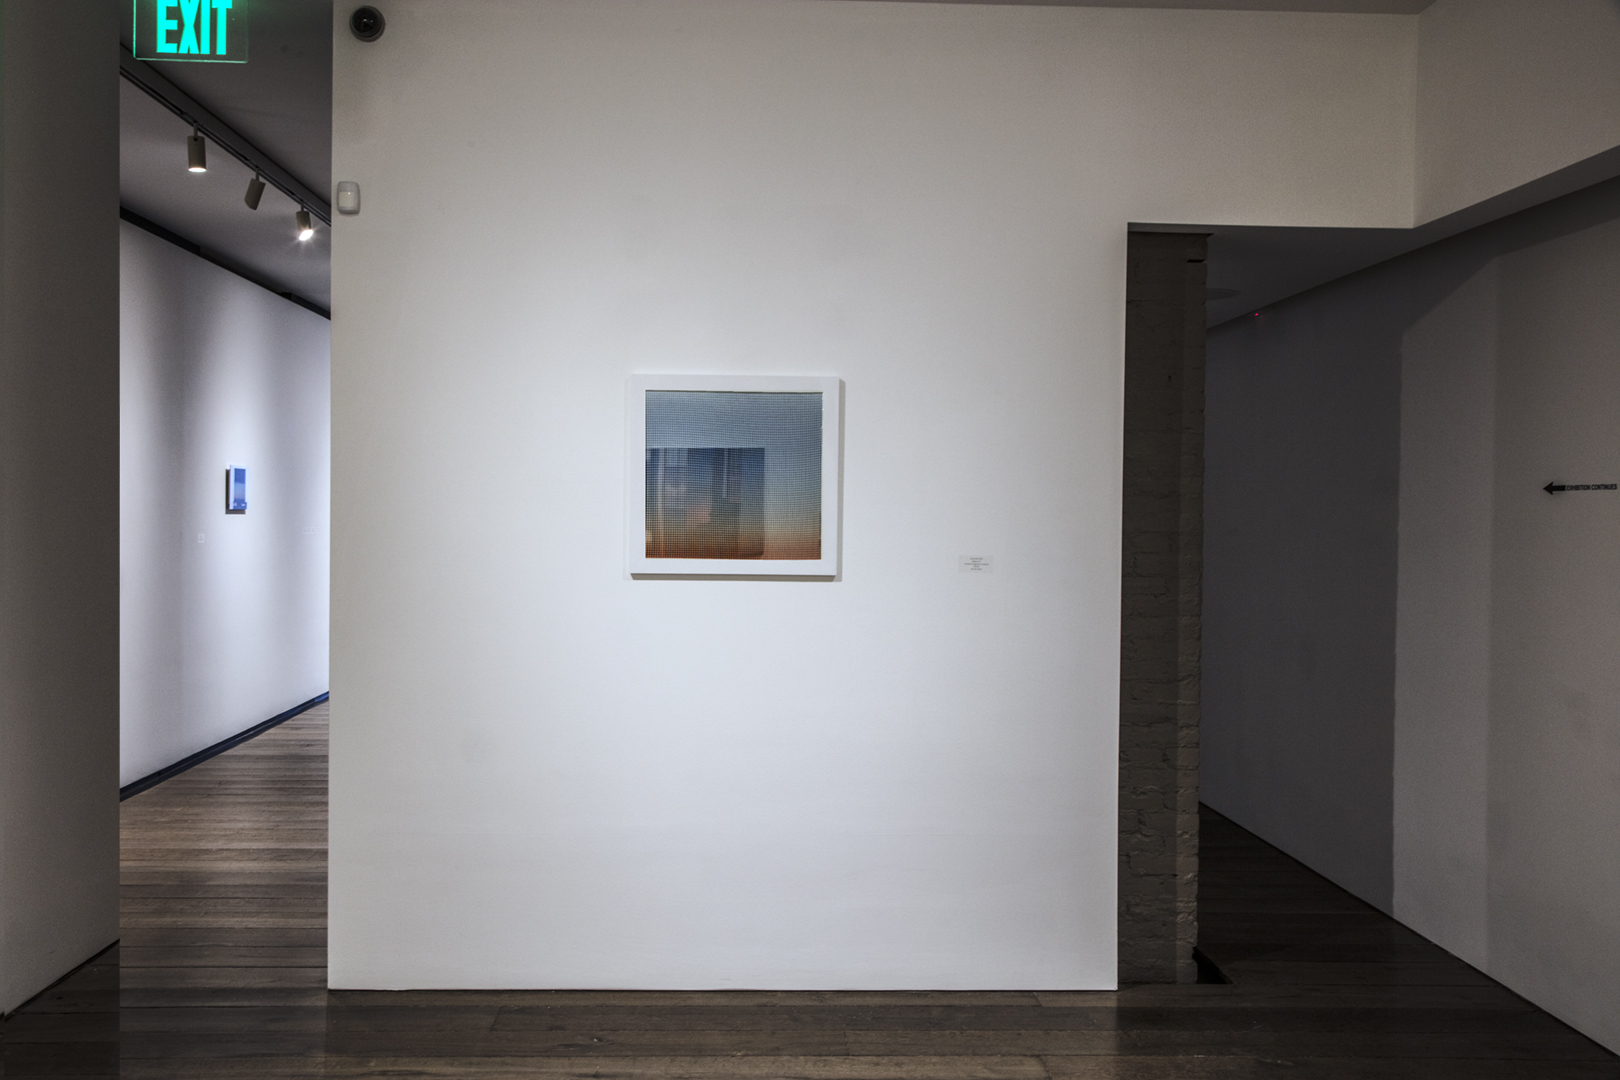 31. Installation view of Sunscreen